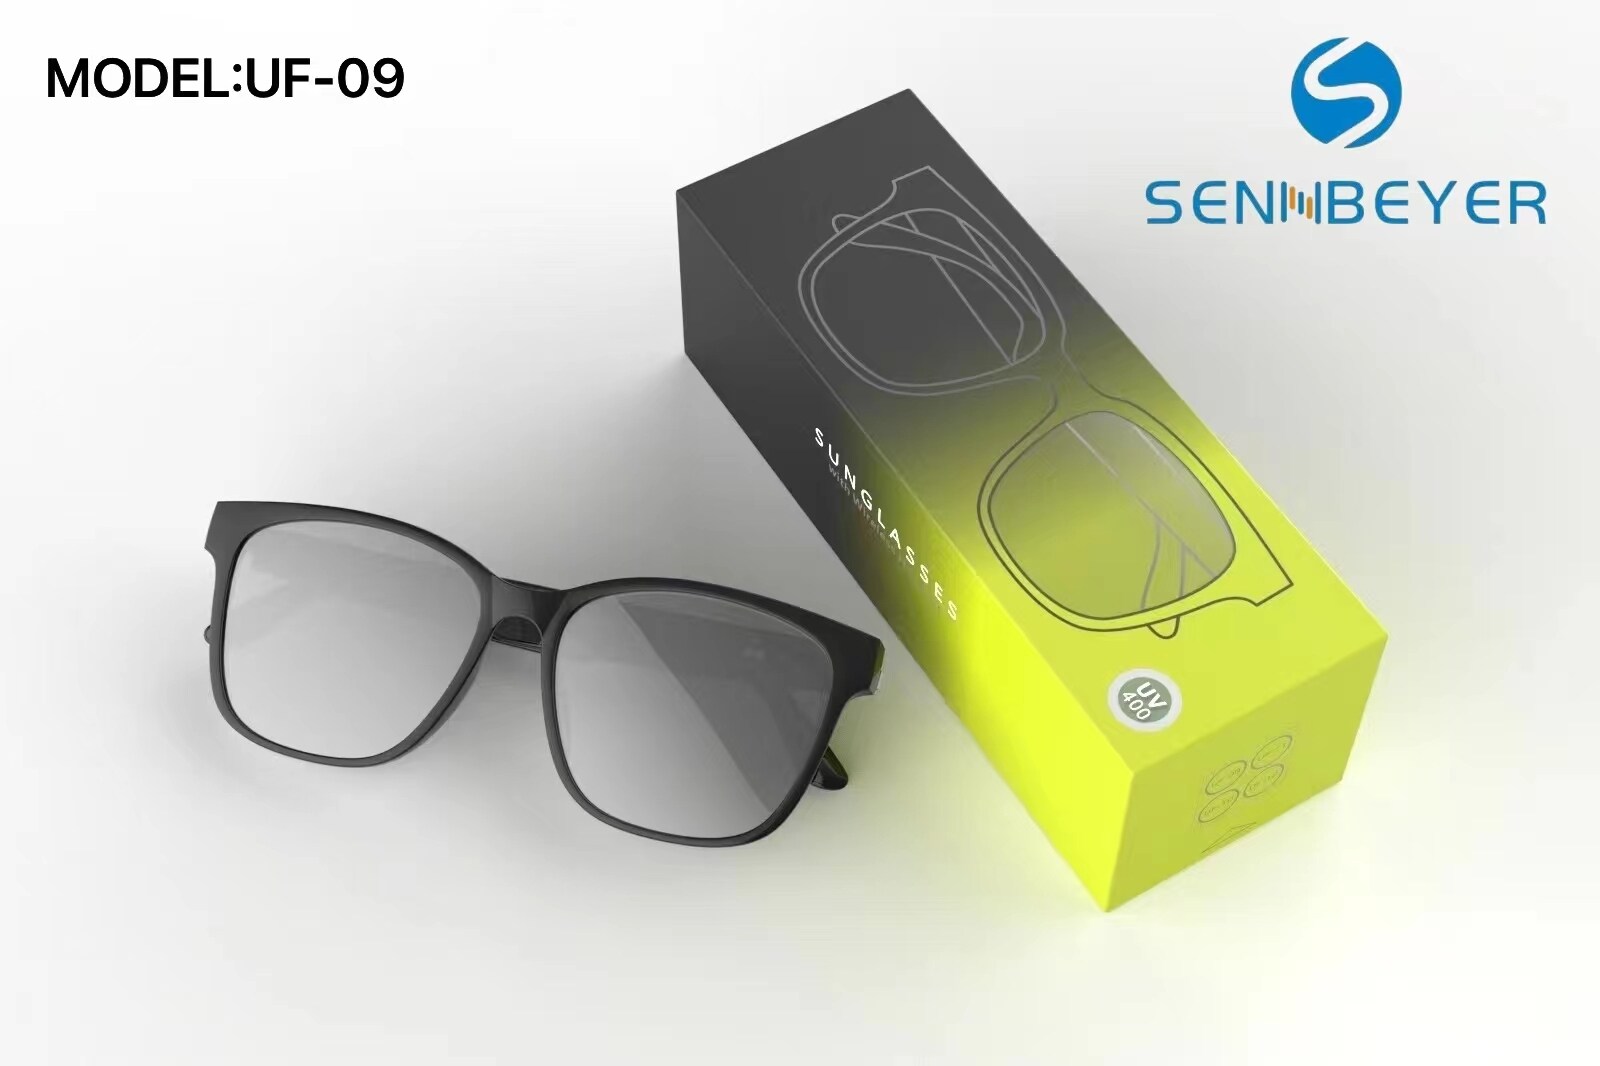 Bluetooth Glasses UF-12   High-quality Music Stereo Playback,Bluetooth Glasses UF-09   High-quality Music Stereo Playback